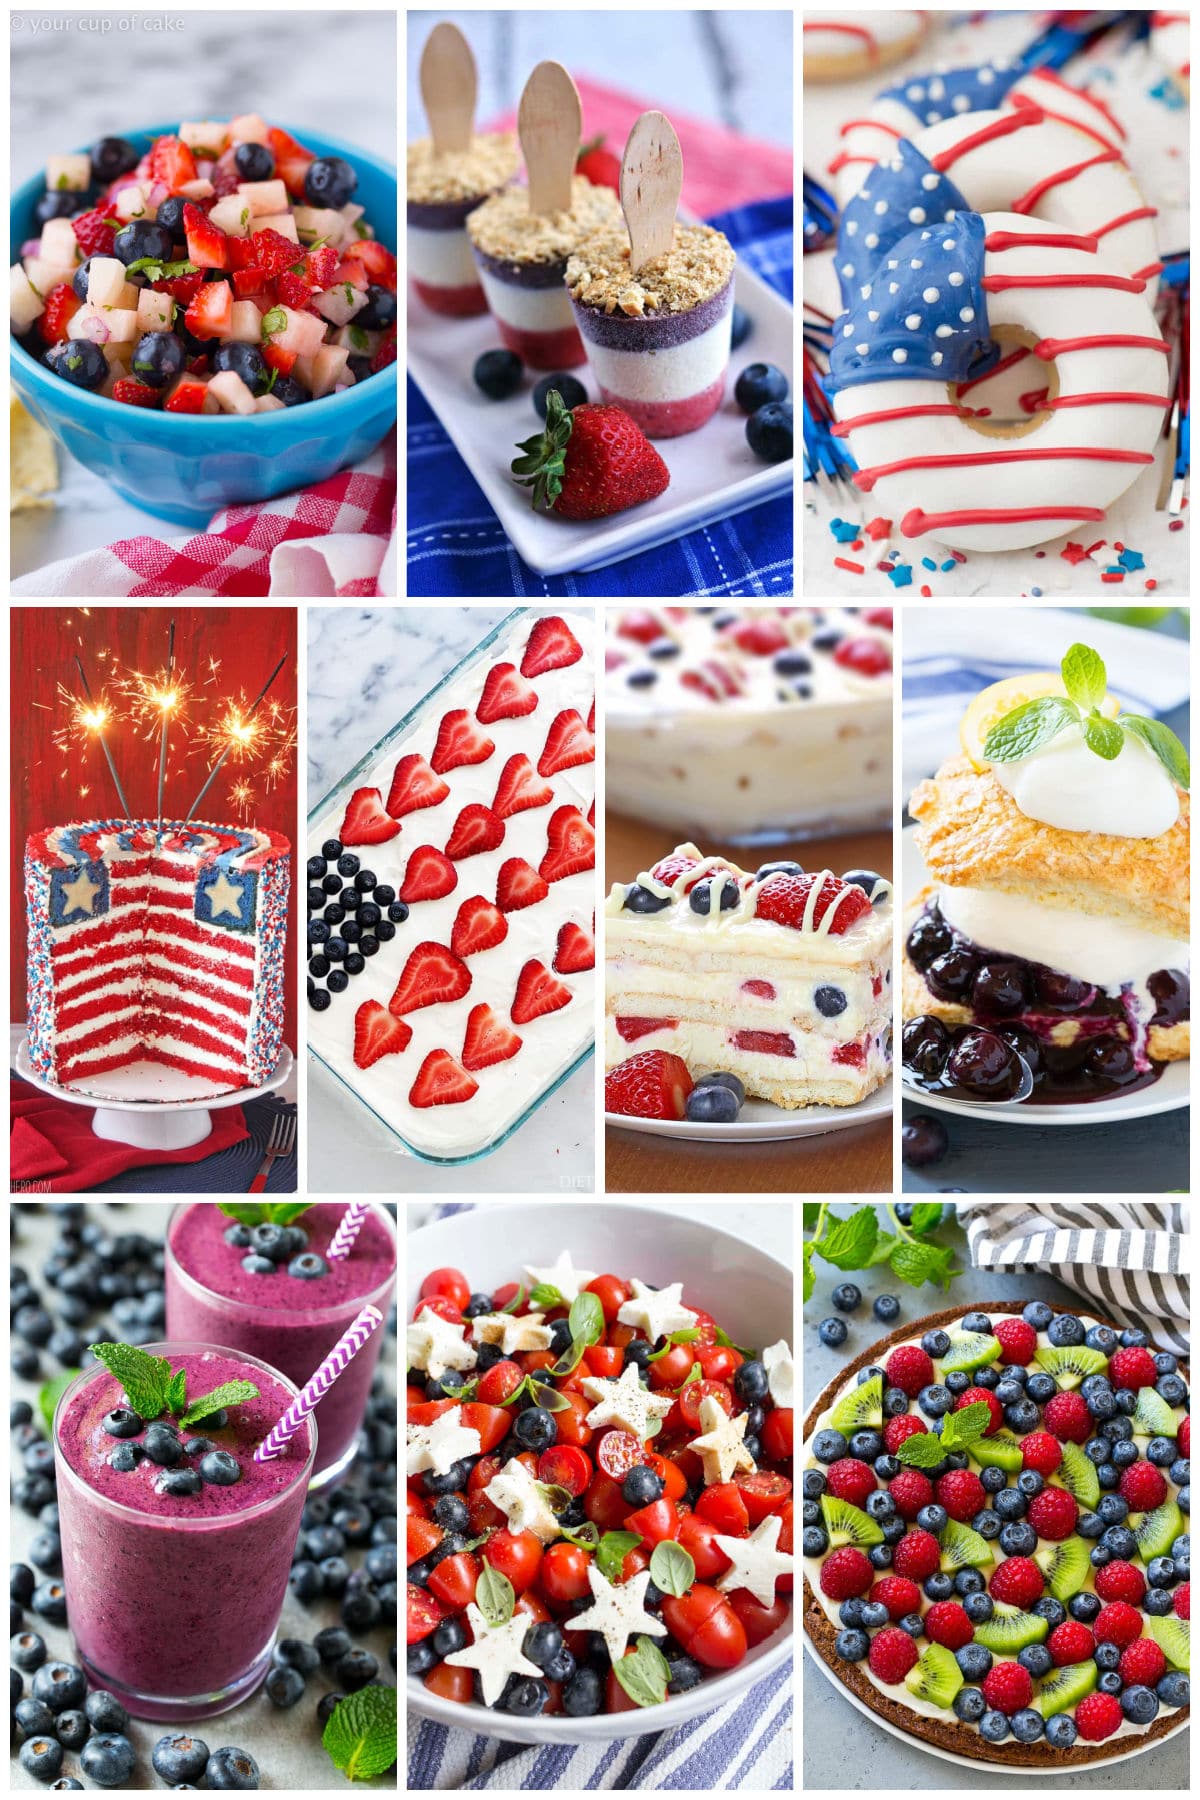 A group of festive 4th of July recipes like American flag layer cake, blueberry tomato caprese salad and blueberry shortcake.